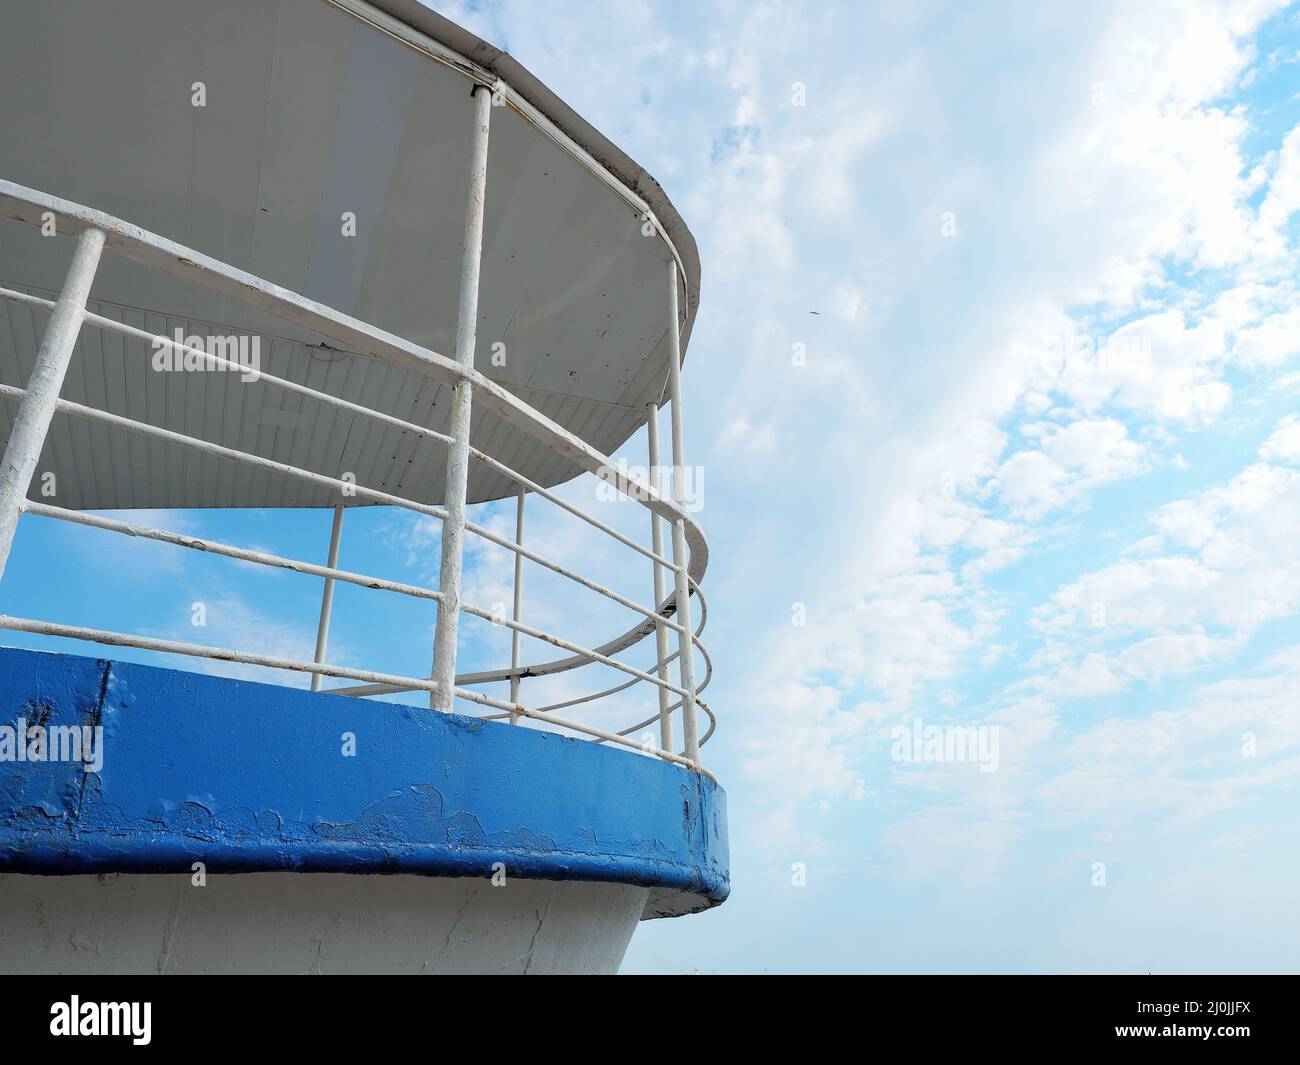 Fragment of an old iron ship with peeling paint against a blue sky with clouds Stock Photo